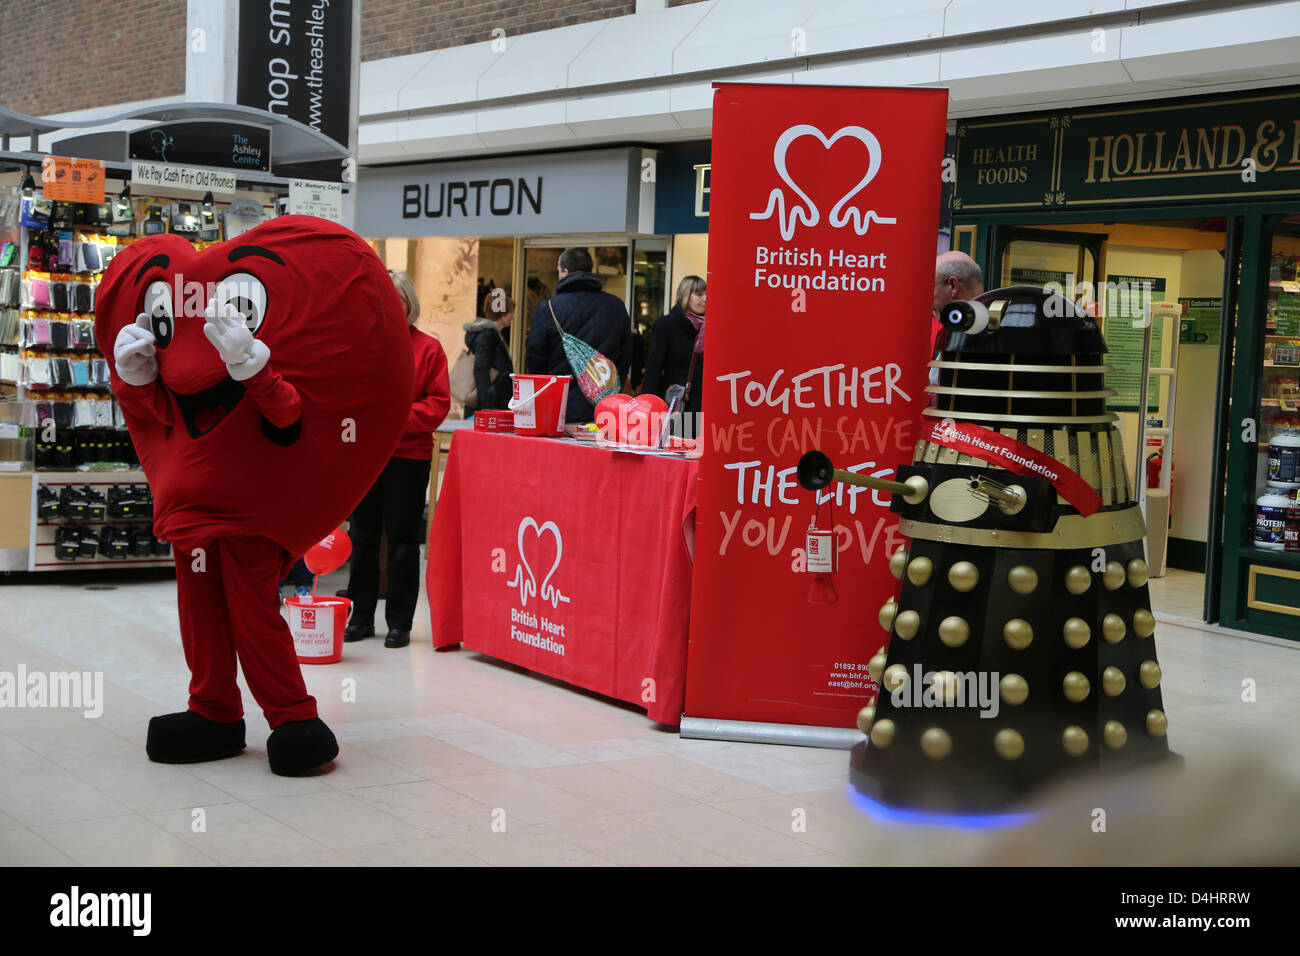 Person Dressed As A Heart And A Dalek From Doctor Who Next To A Stall For Raising Money For the British Heart Foundation Stock Photo